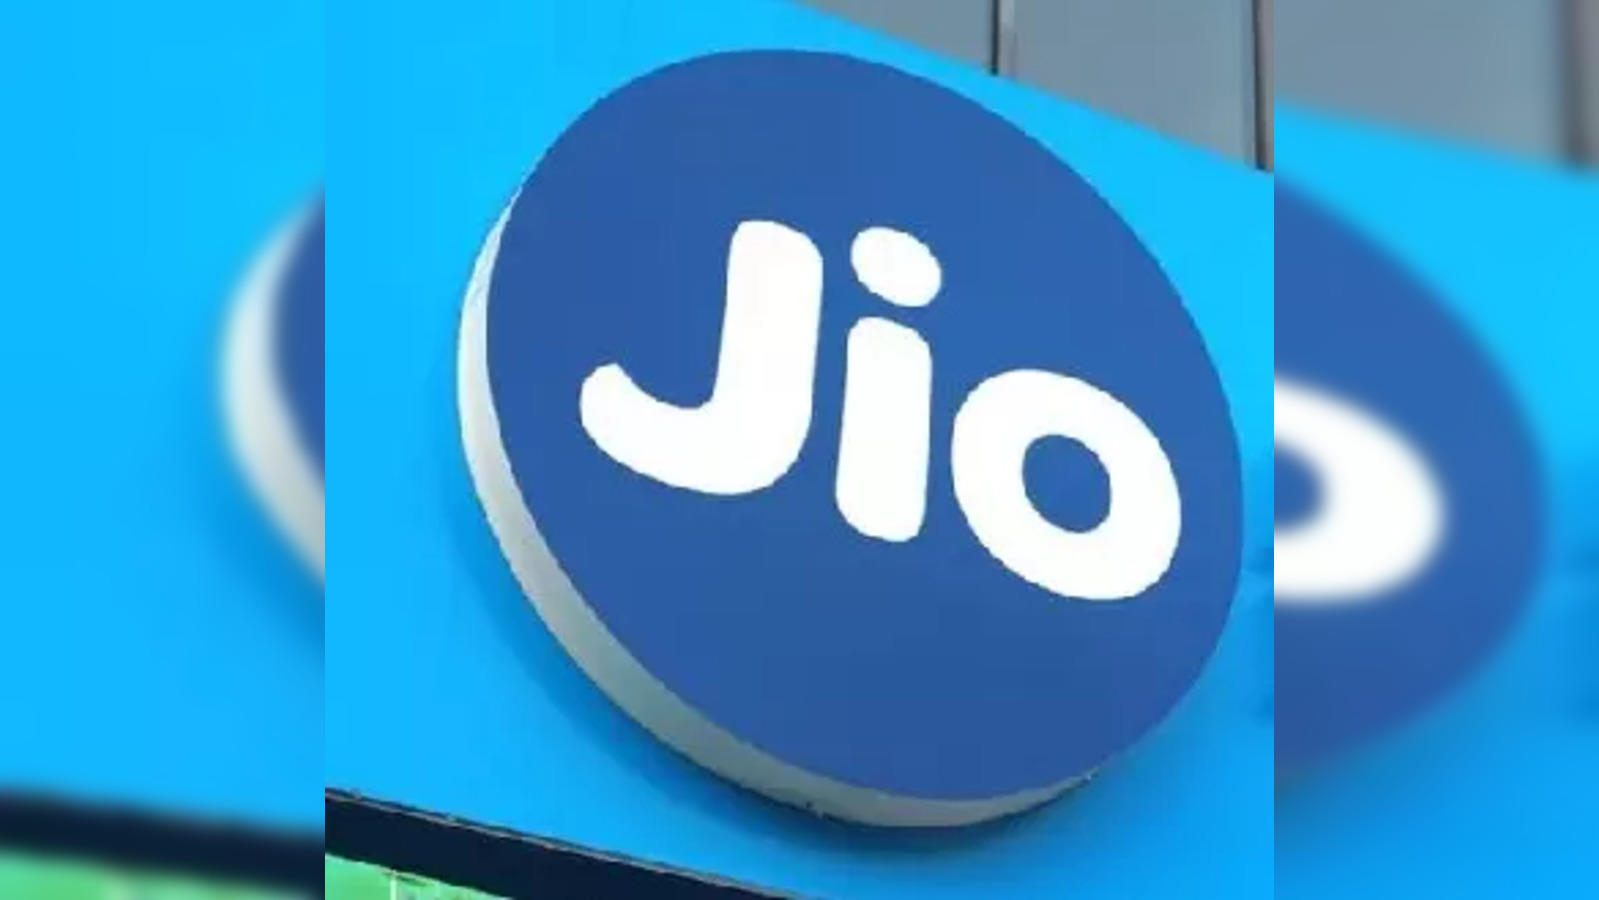 Jio 5G Now Available in 26 GHz Band, with Speeds Up to 2 Gbps